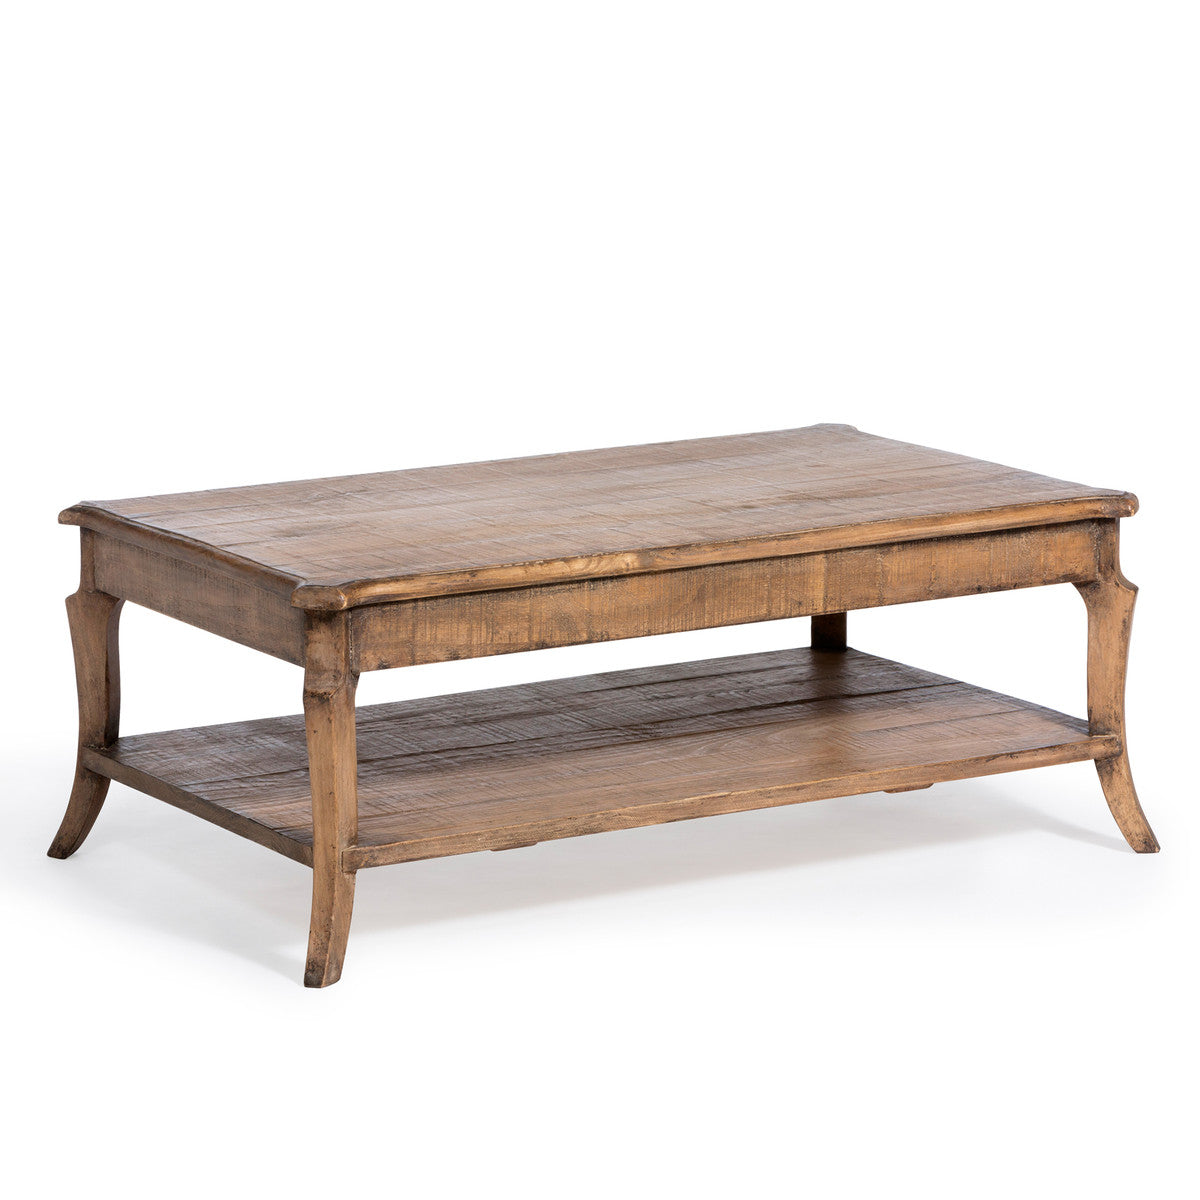 Provincial Coffee Table-Iron Accents